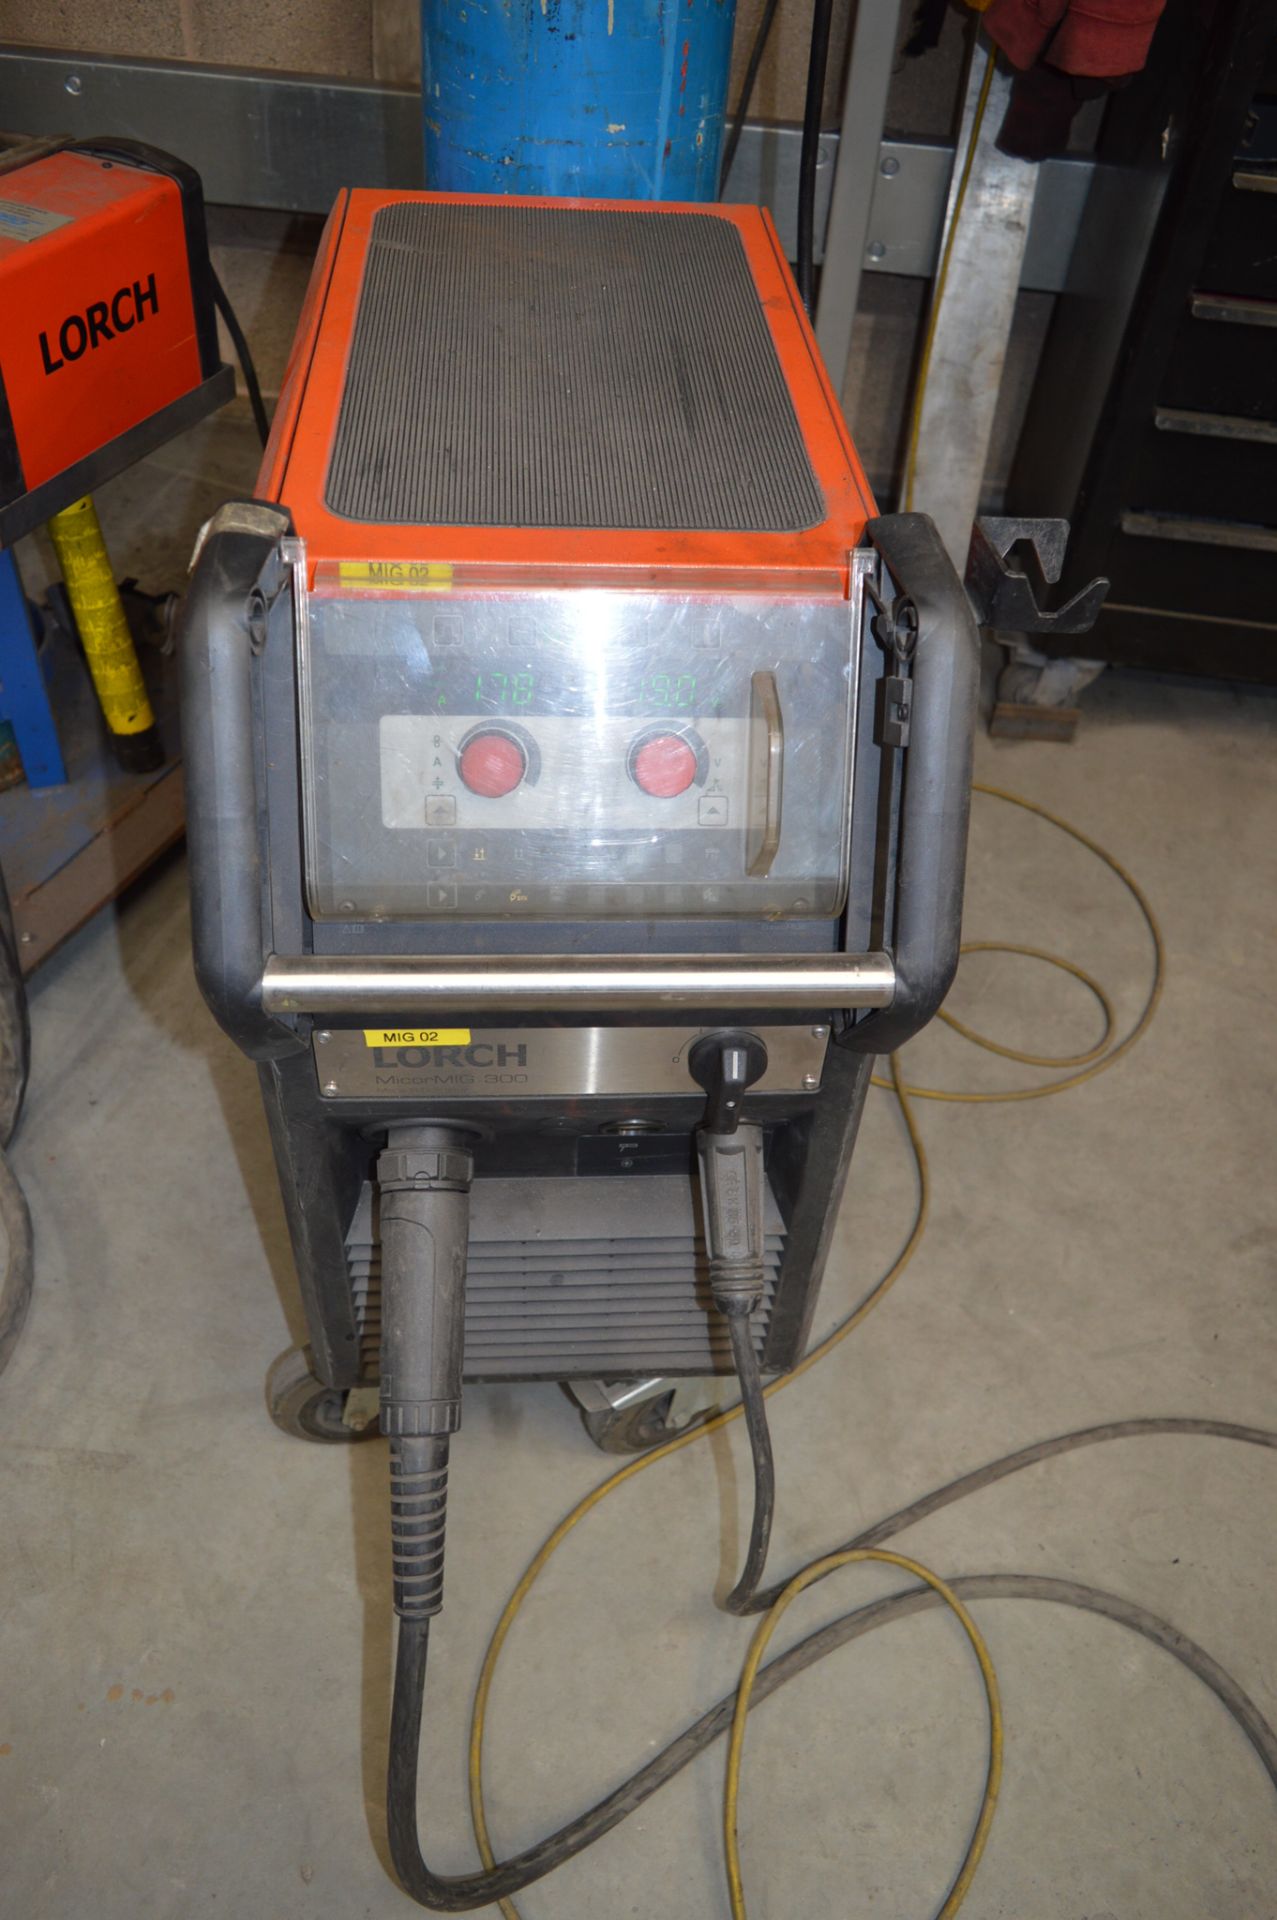 Lorch Micromig 300 MIG welder S/N: 4064-2511-0001-4 c/w torch, regulator and earth lead ** Not - Image 2 of 6